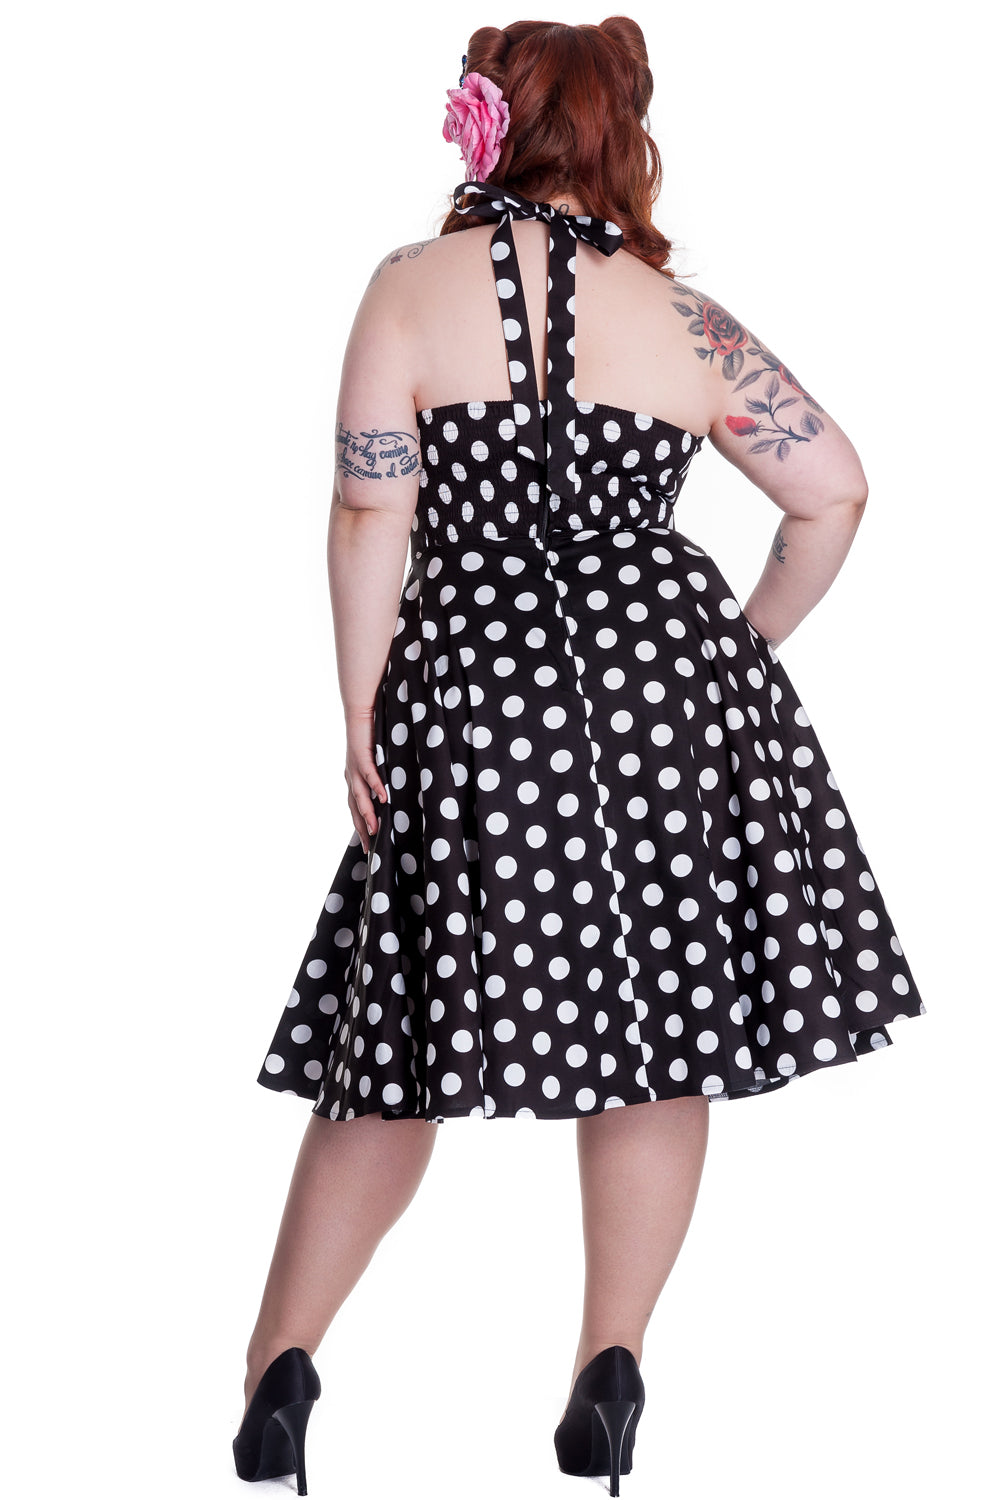 Retro model with tattoos wearing a halter neck 50s style fit and flare polka dot dress